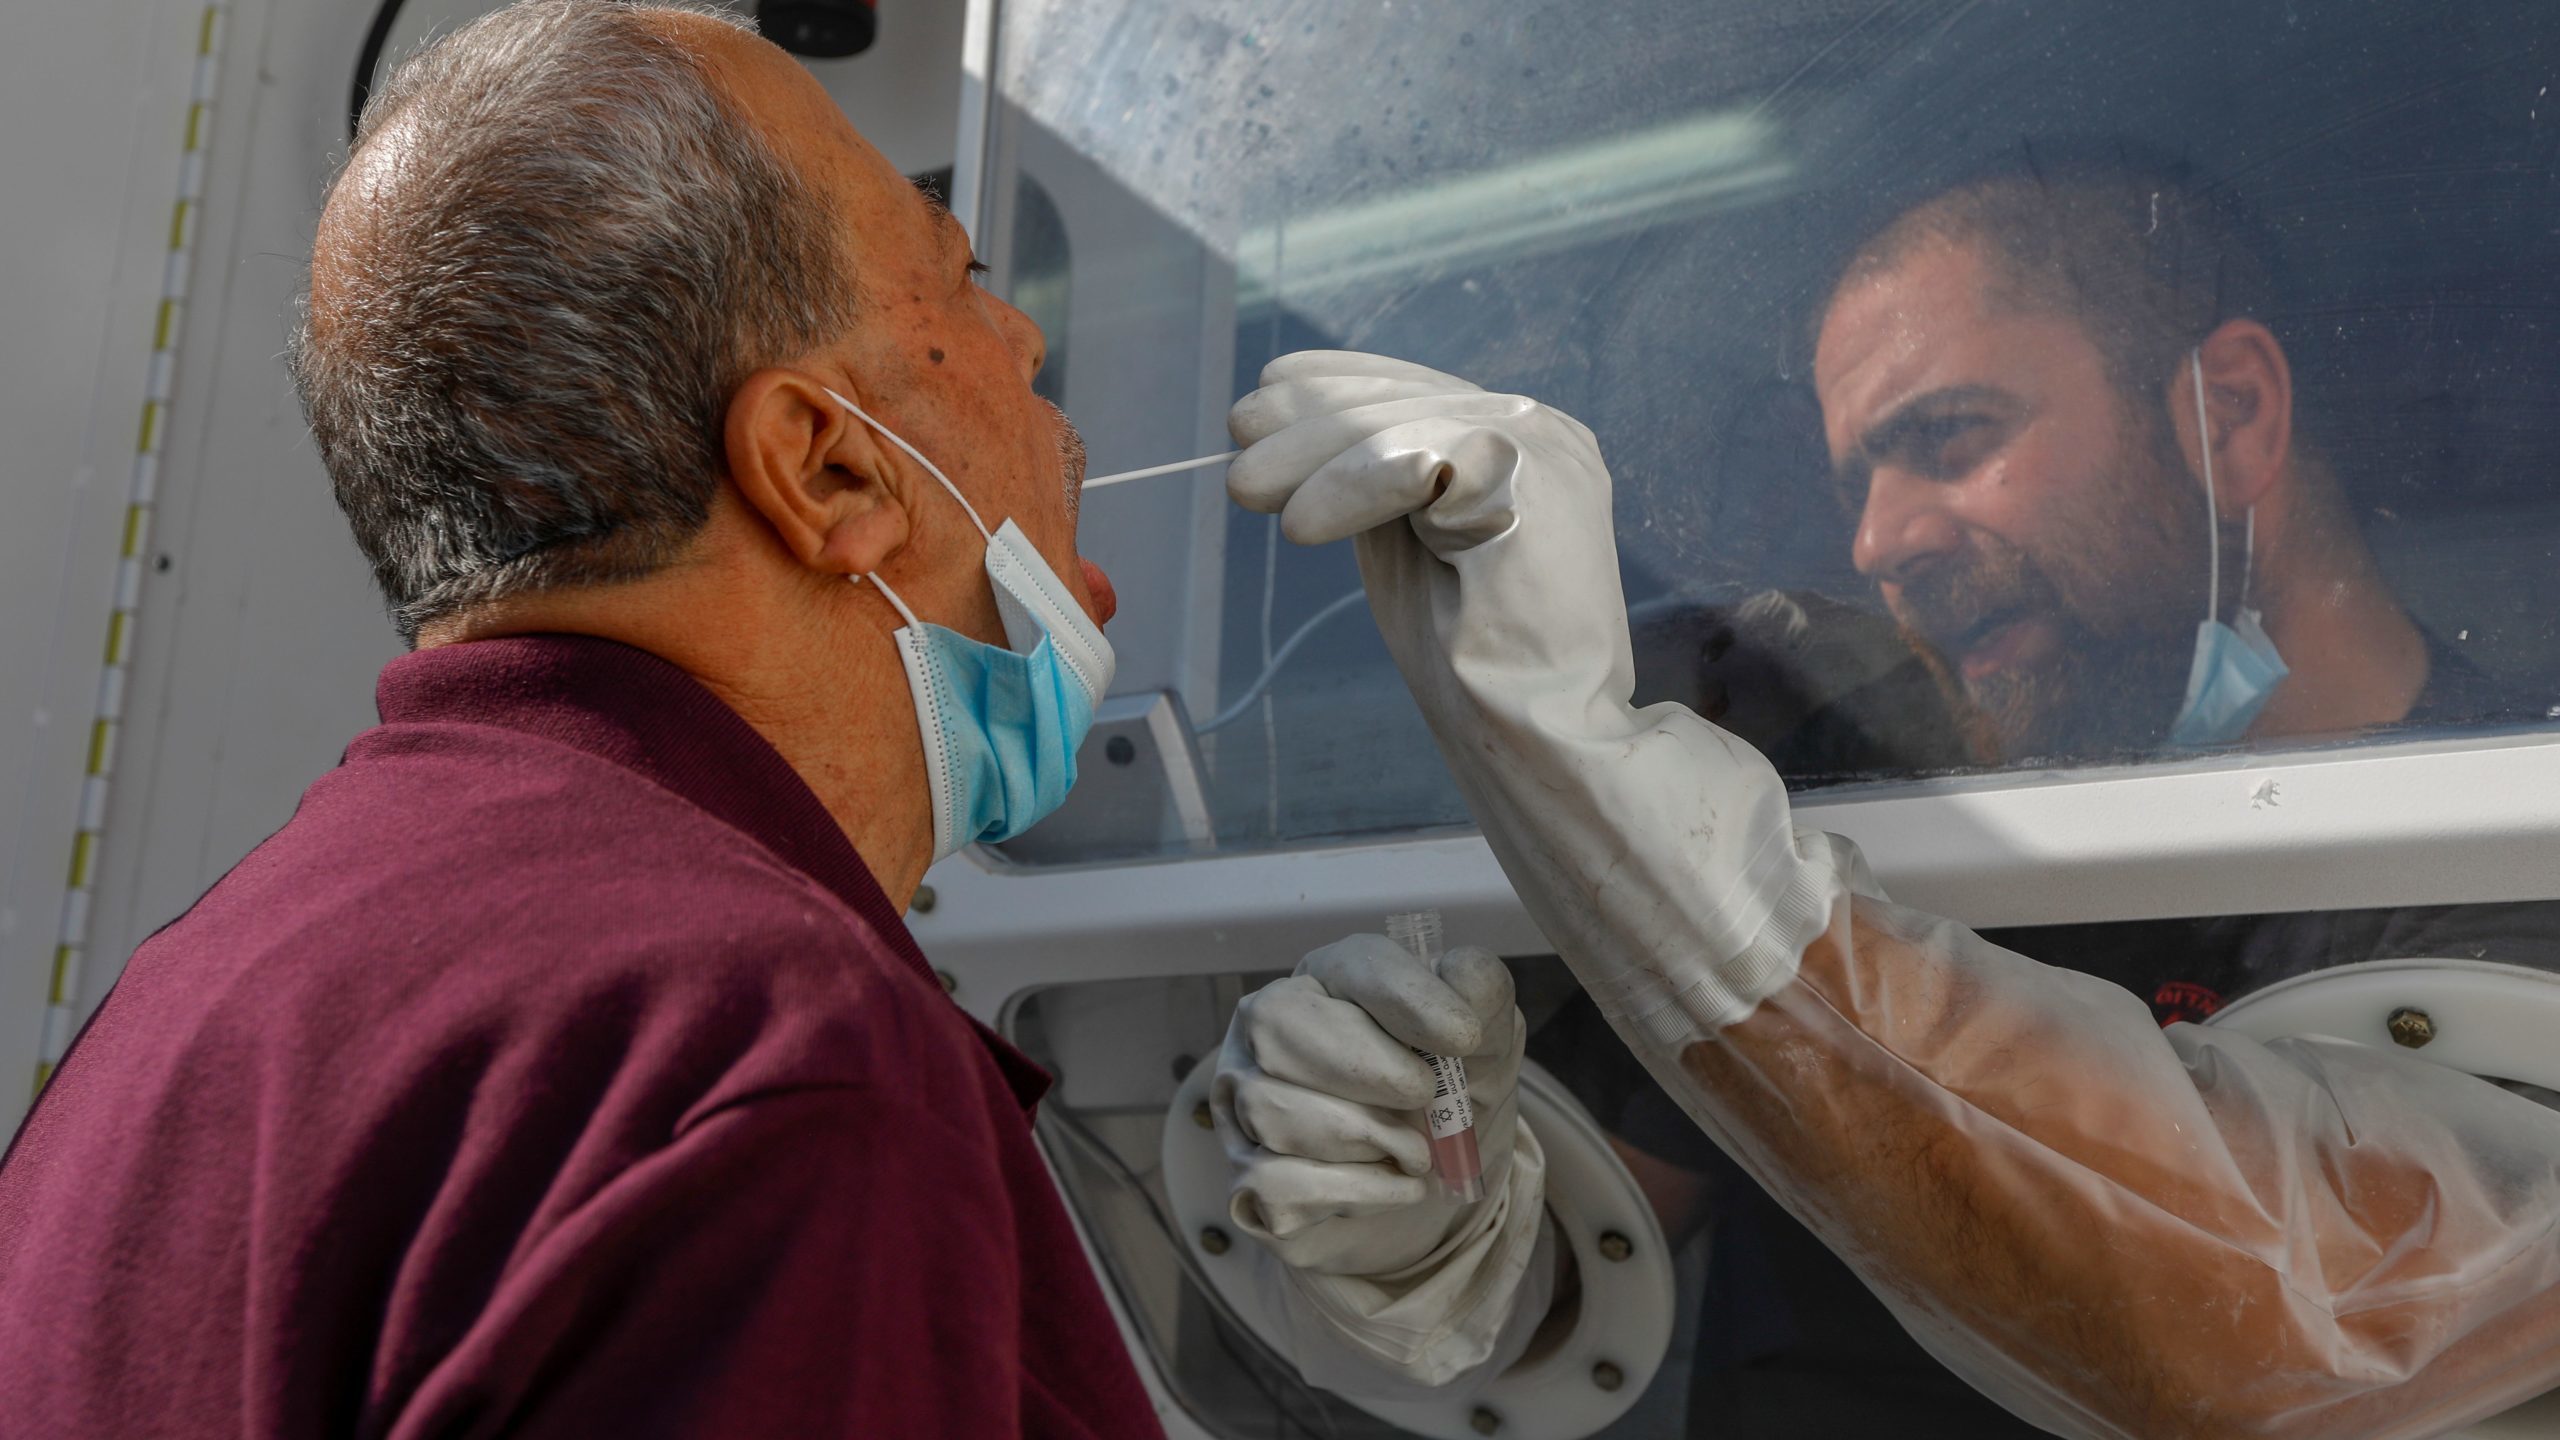 Israel Counters Pandemic’s Second Wave with All-Hands-On-Deck